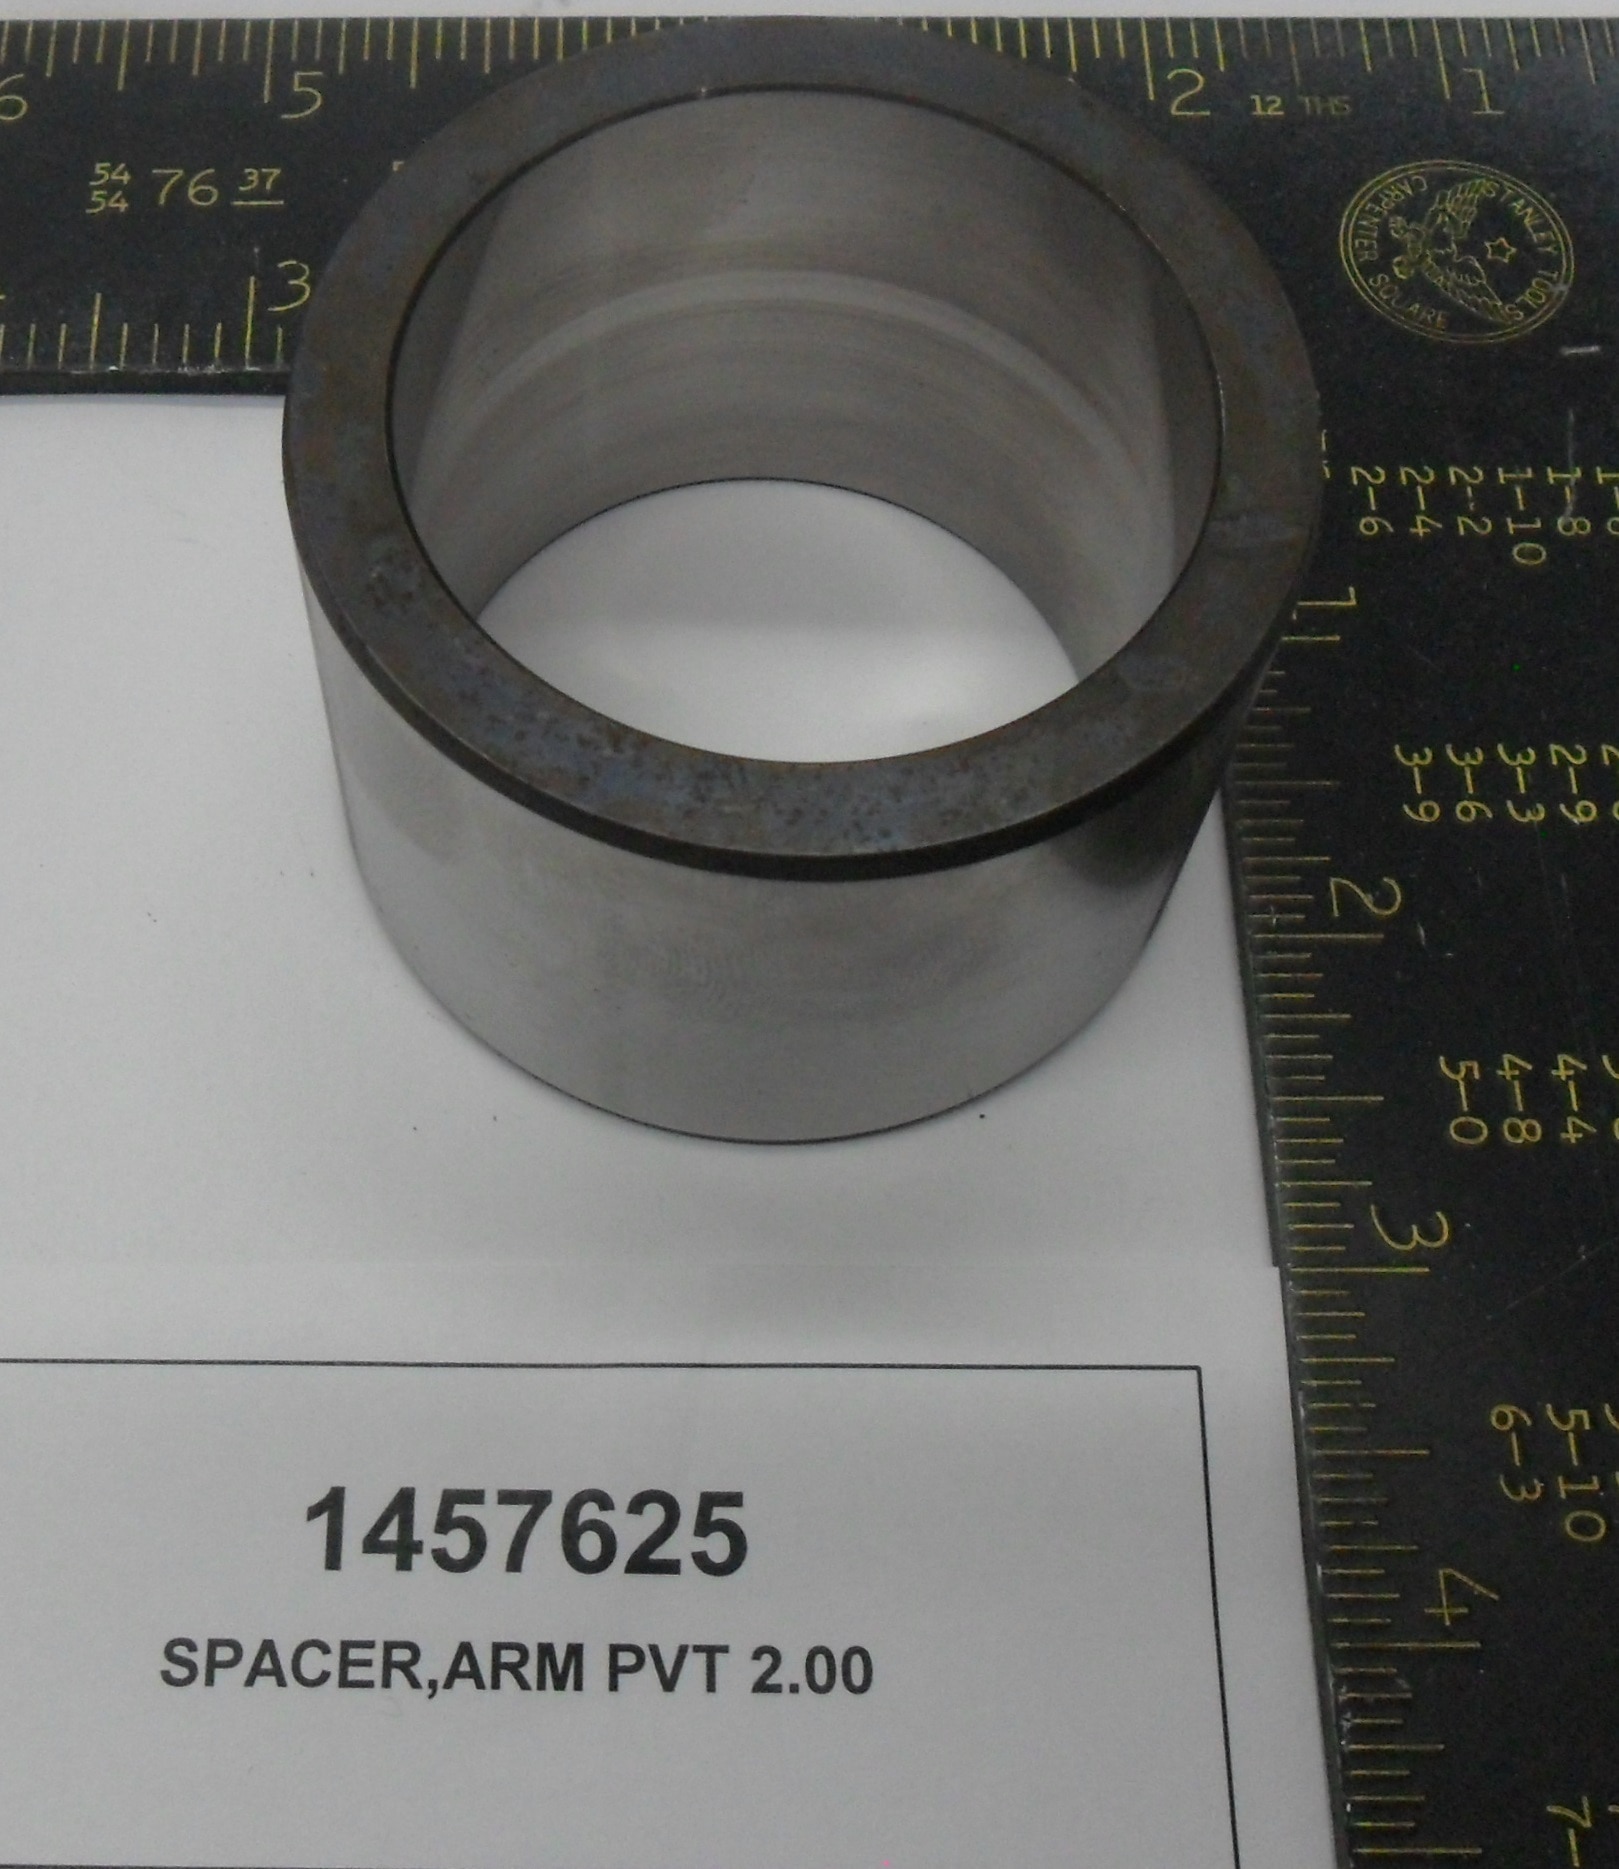 SPACER,ARM PVT 2.00